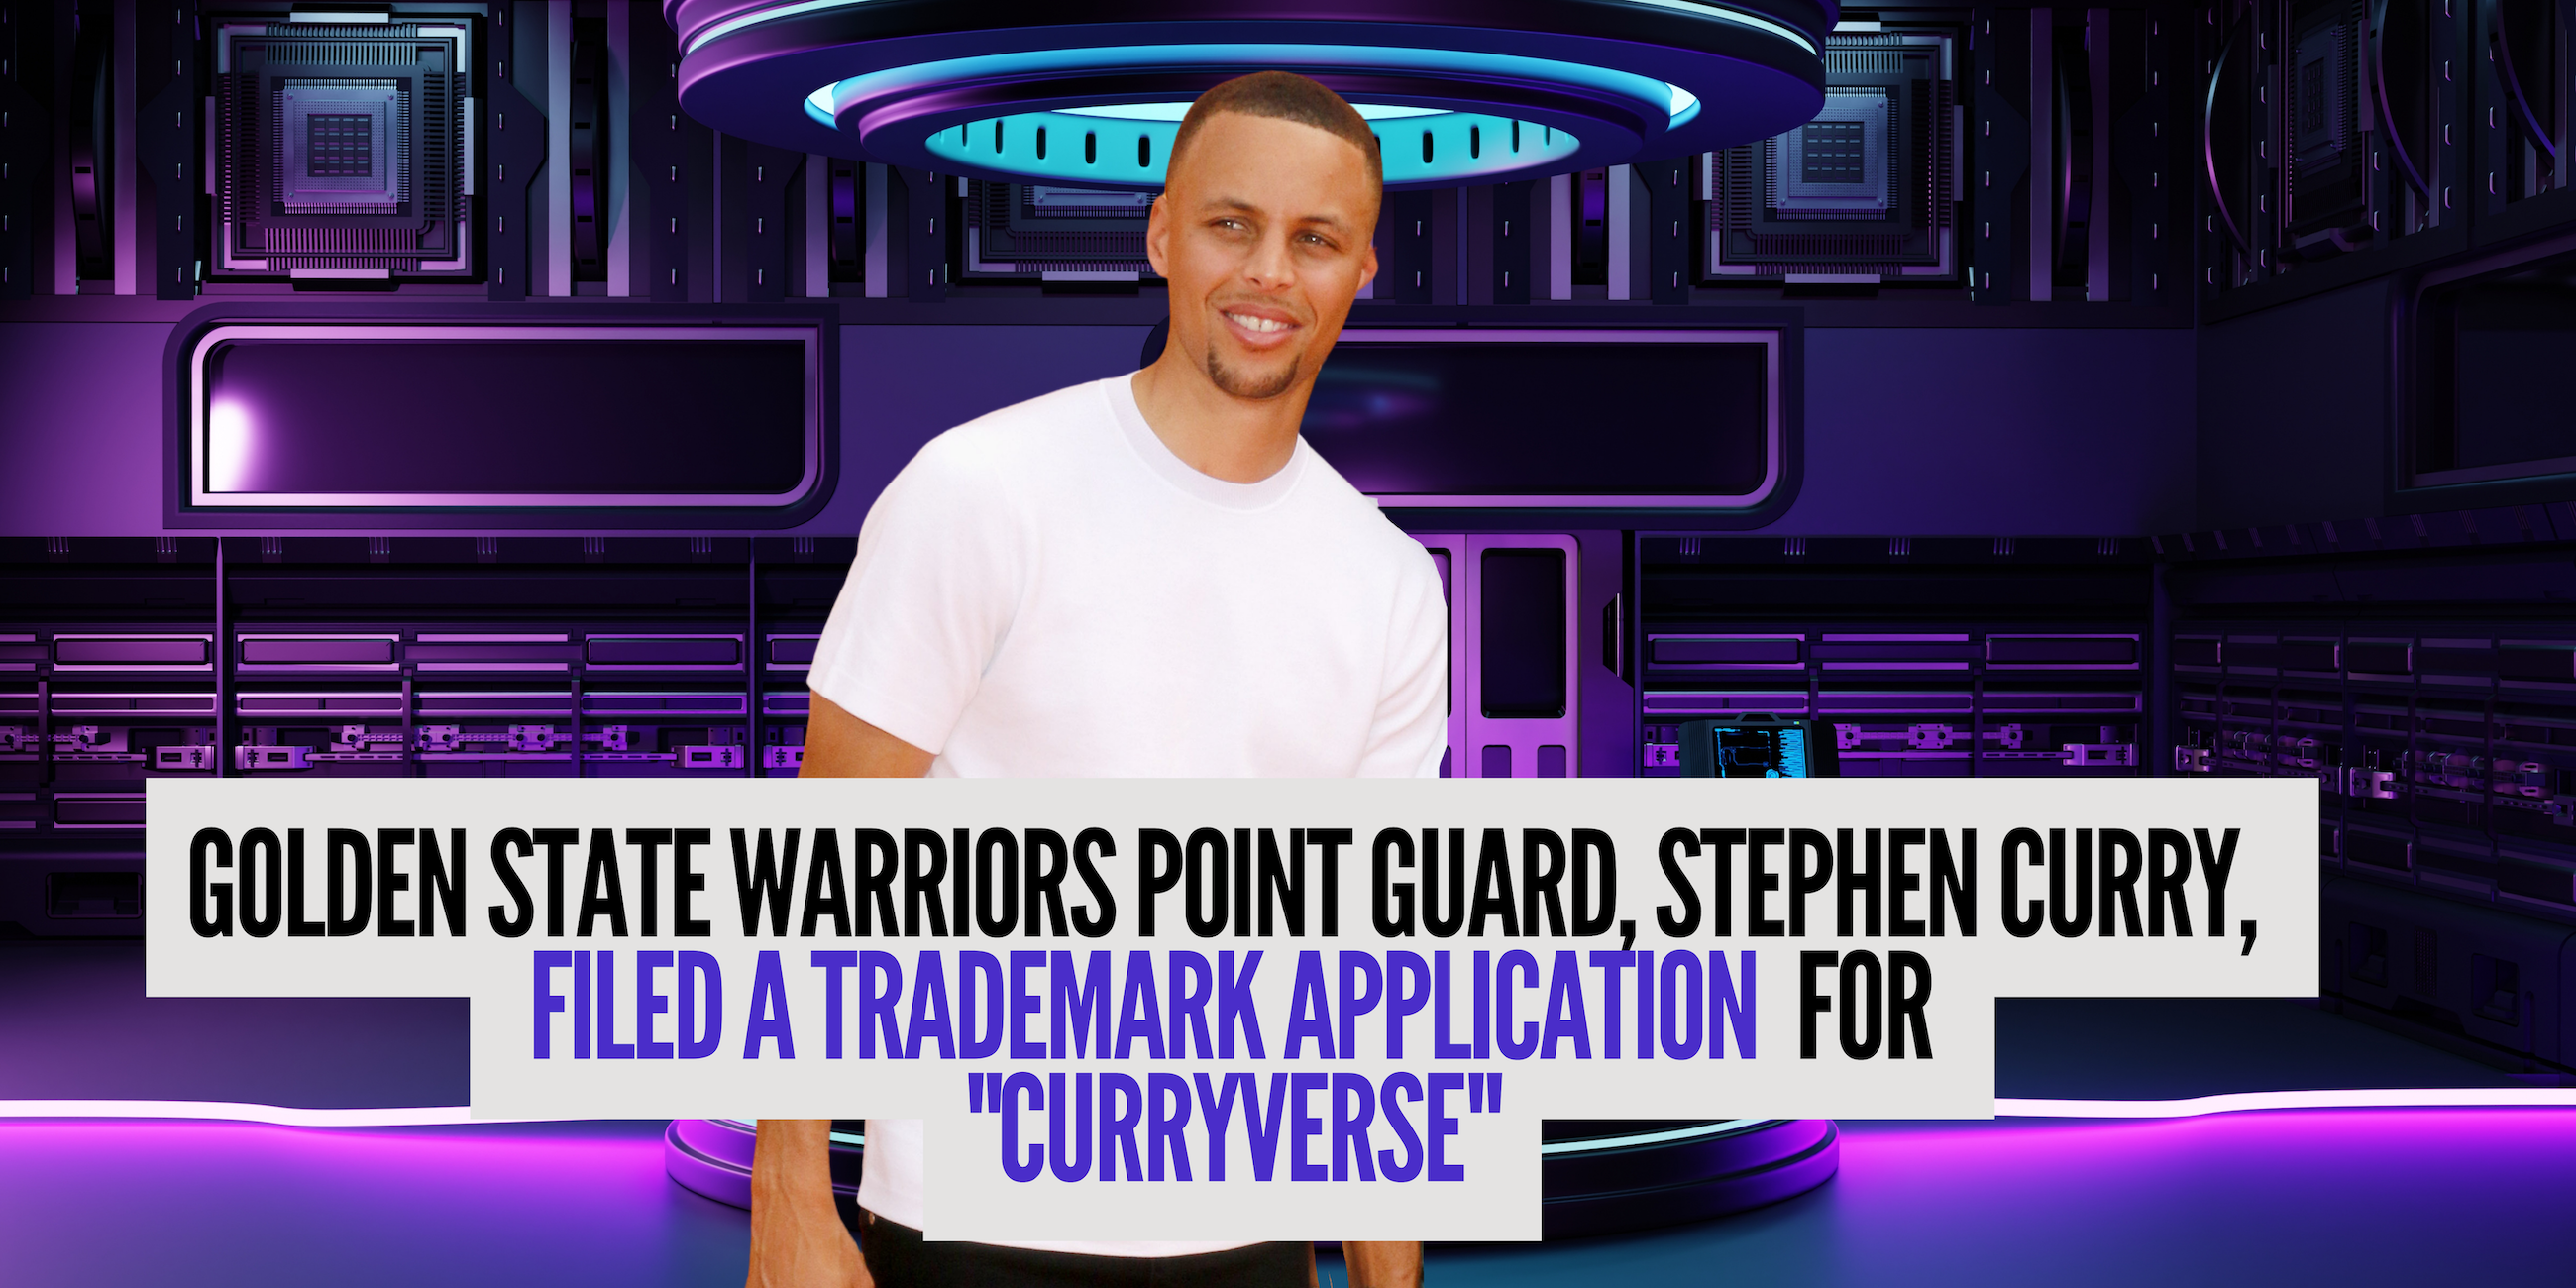  Steph Curry Files Trademark Application for CURRYVERSE